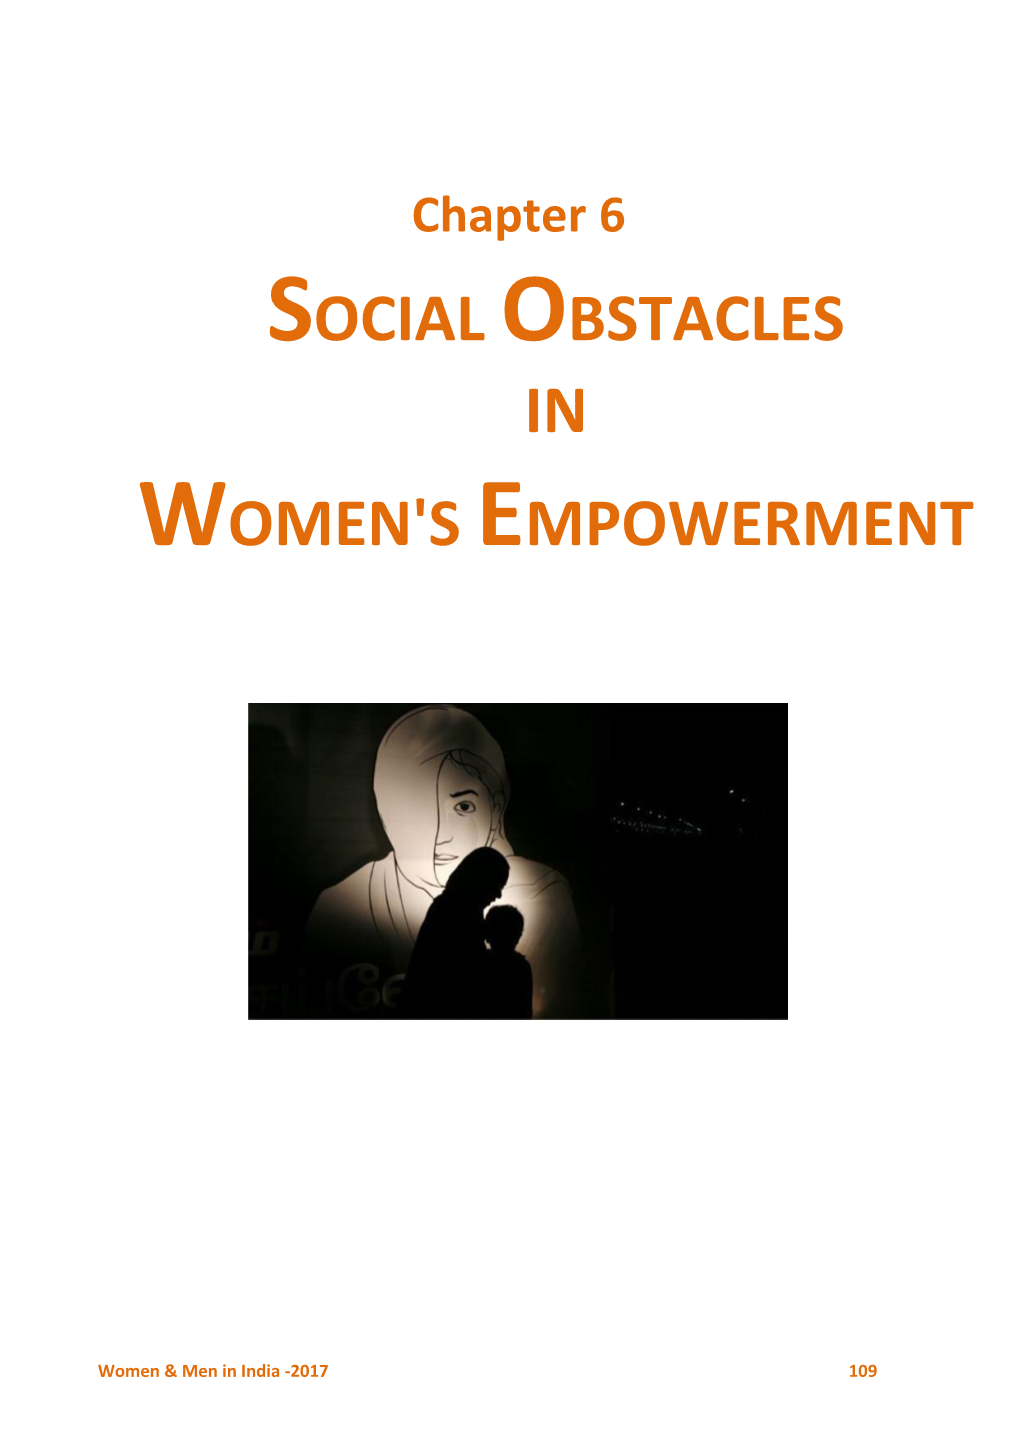 Social Obstacles in Women's Empowerment